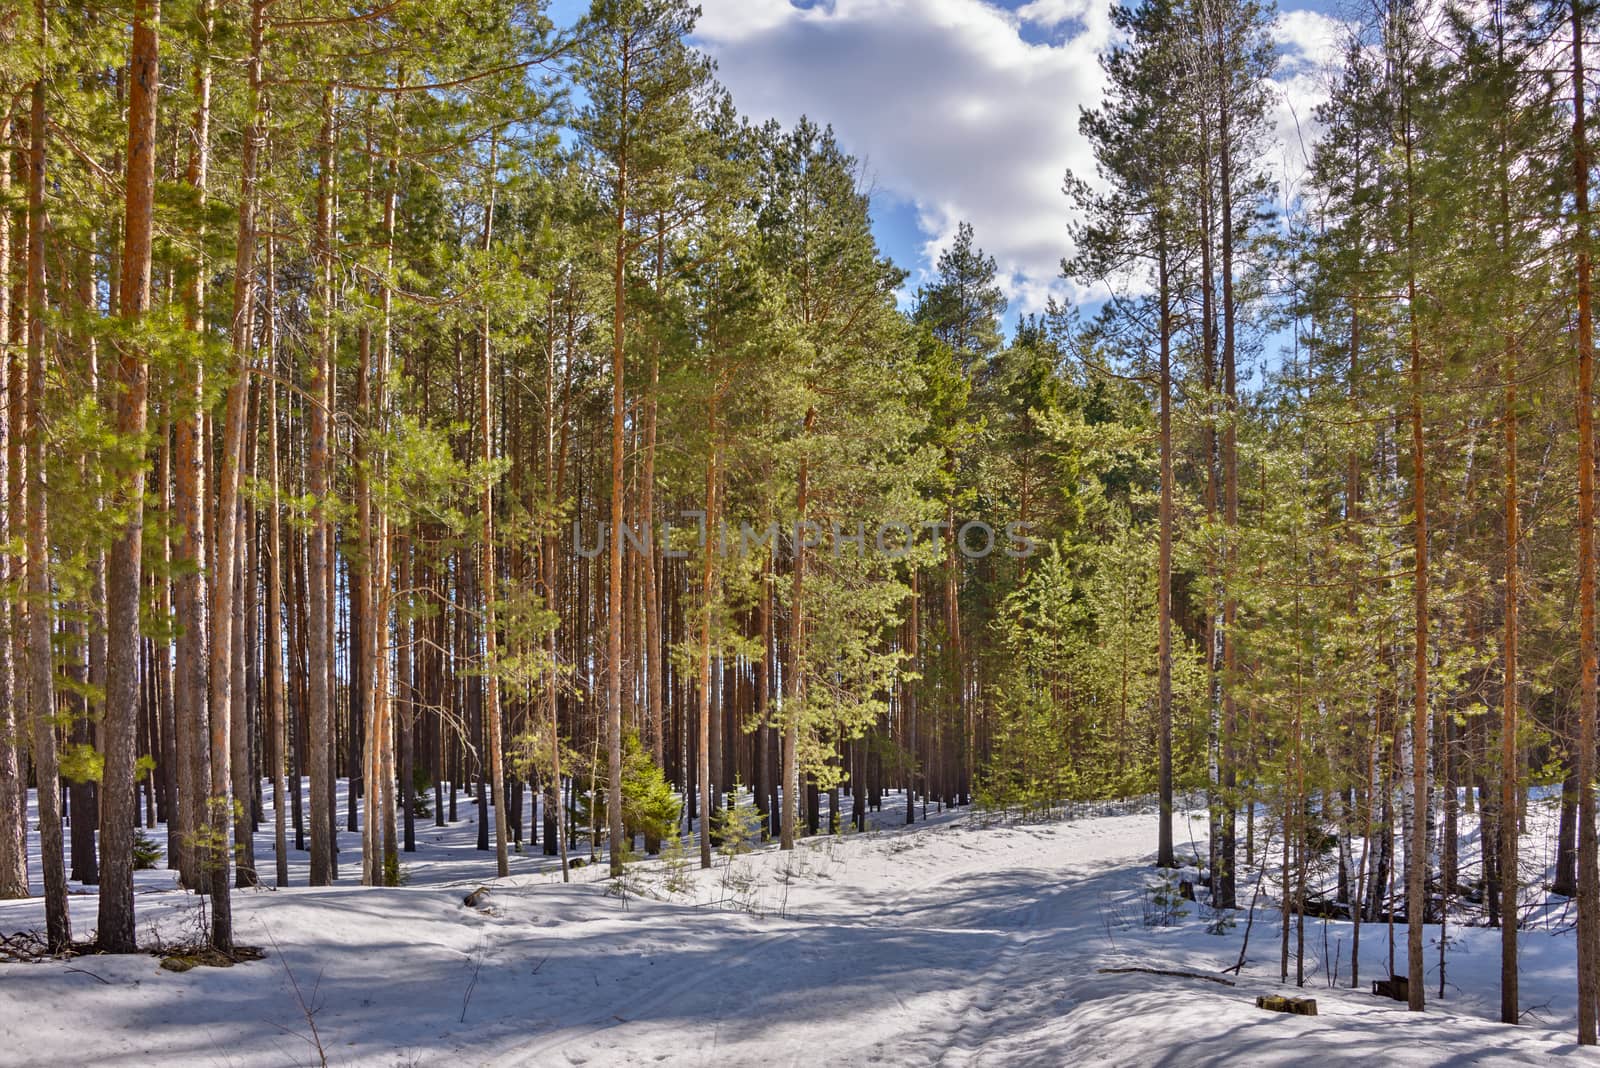 Pine trees on a snowy road in the forest lit by the bright sun under a blue sky in spring.